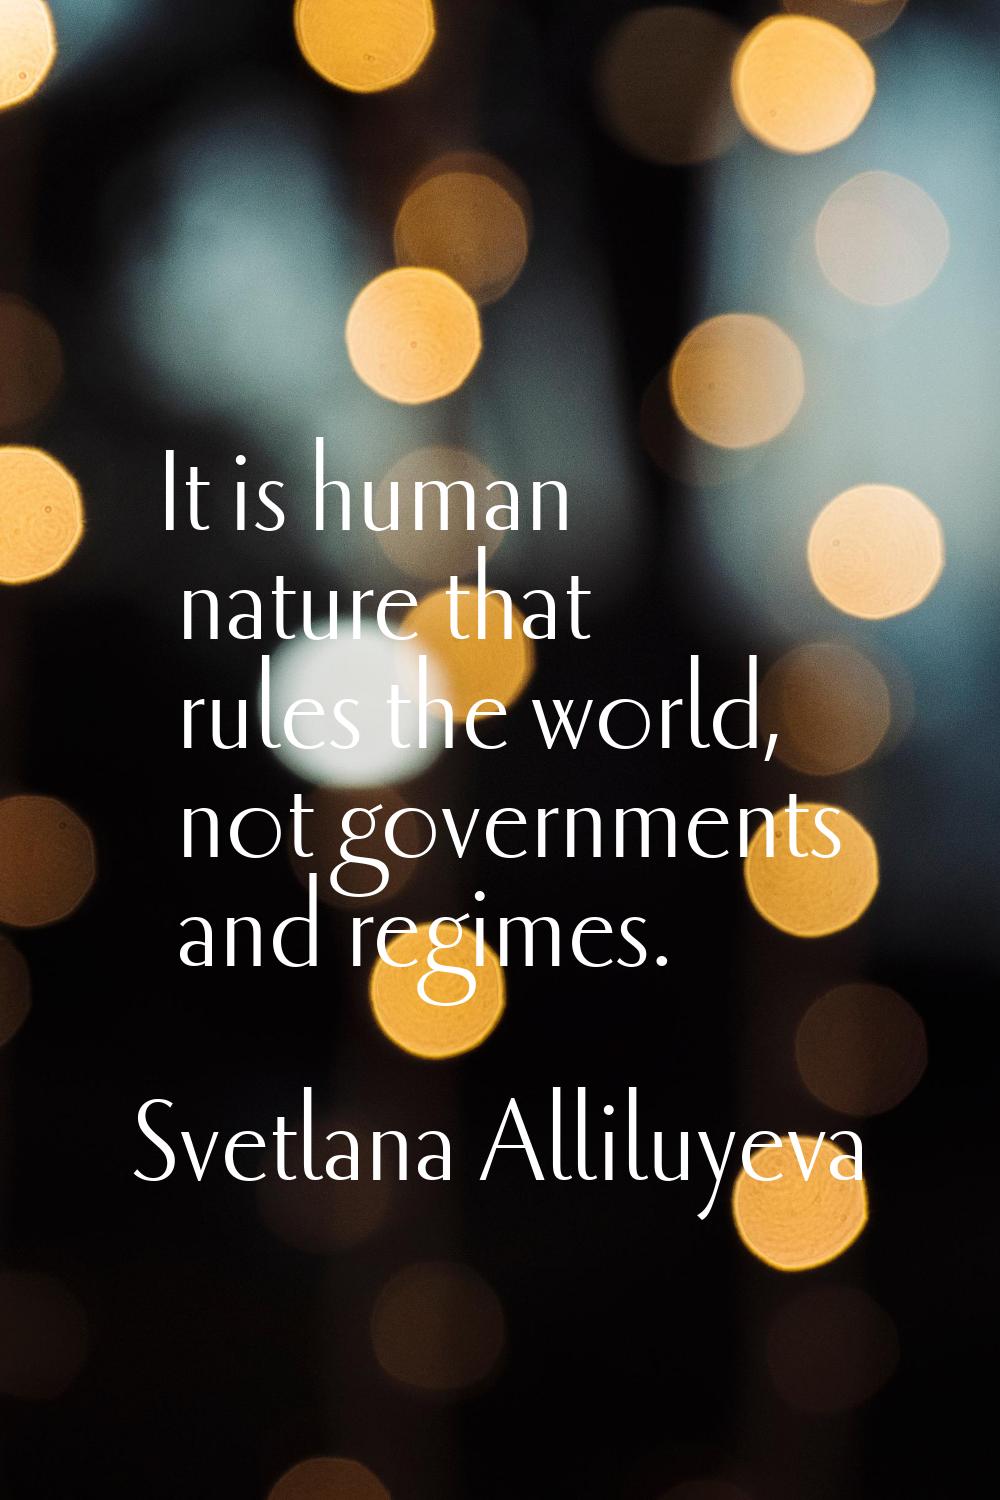 It is human nature that rules the world, not governments and regimes.